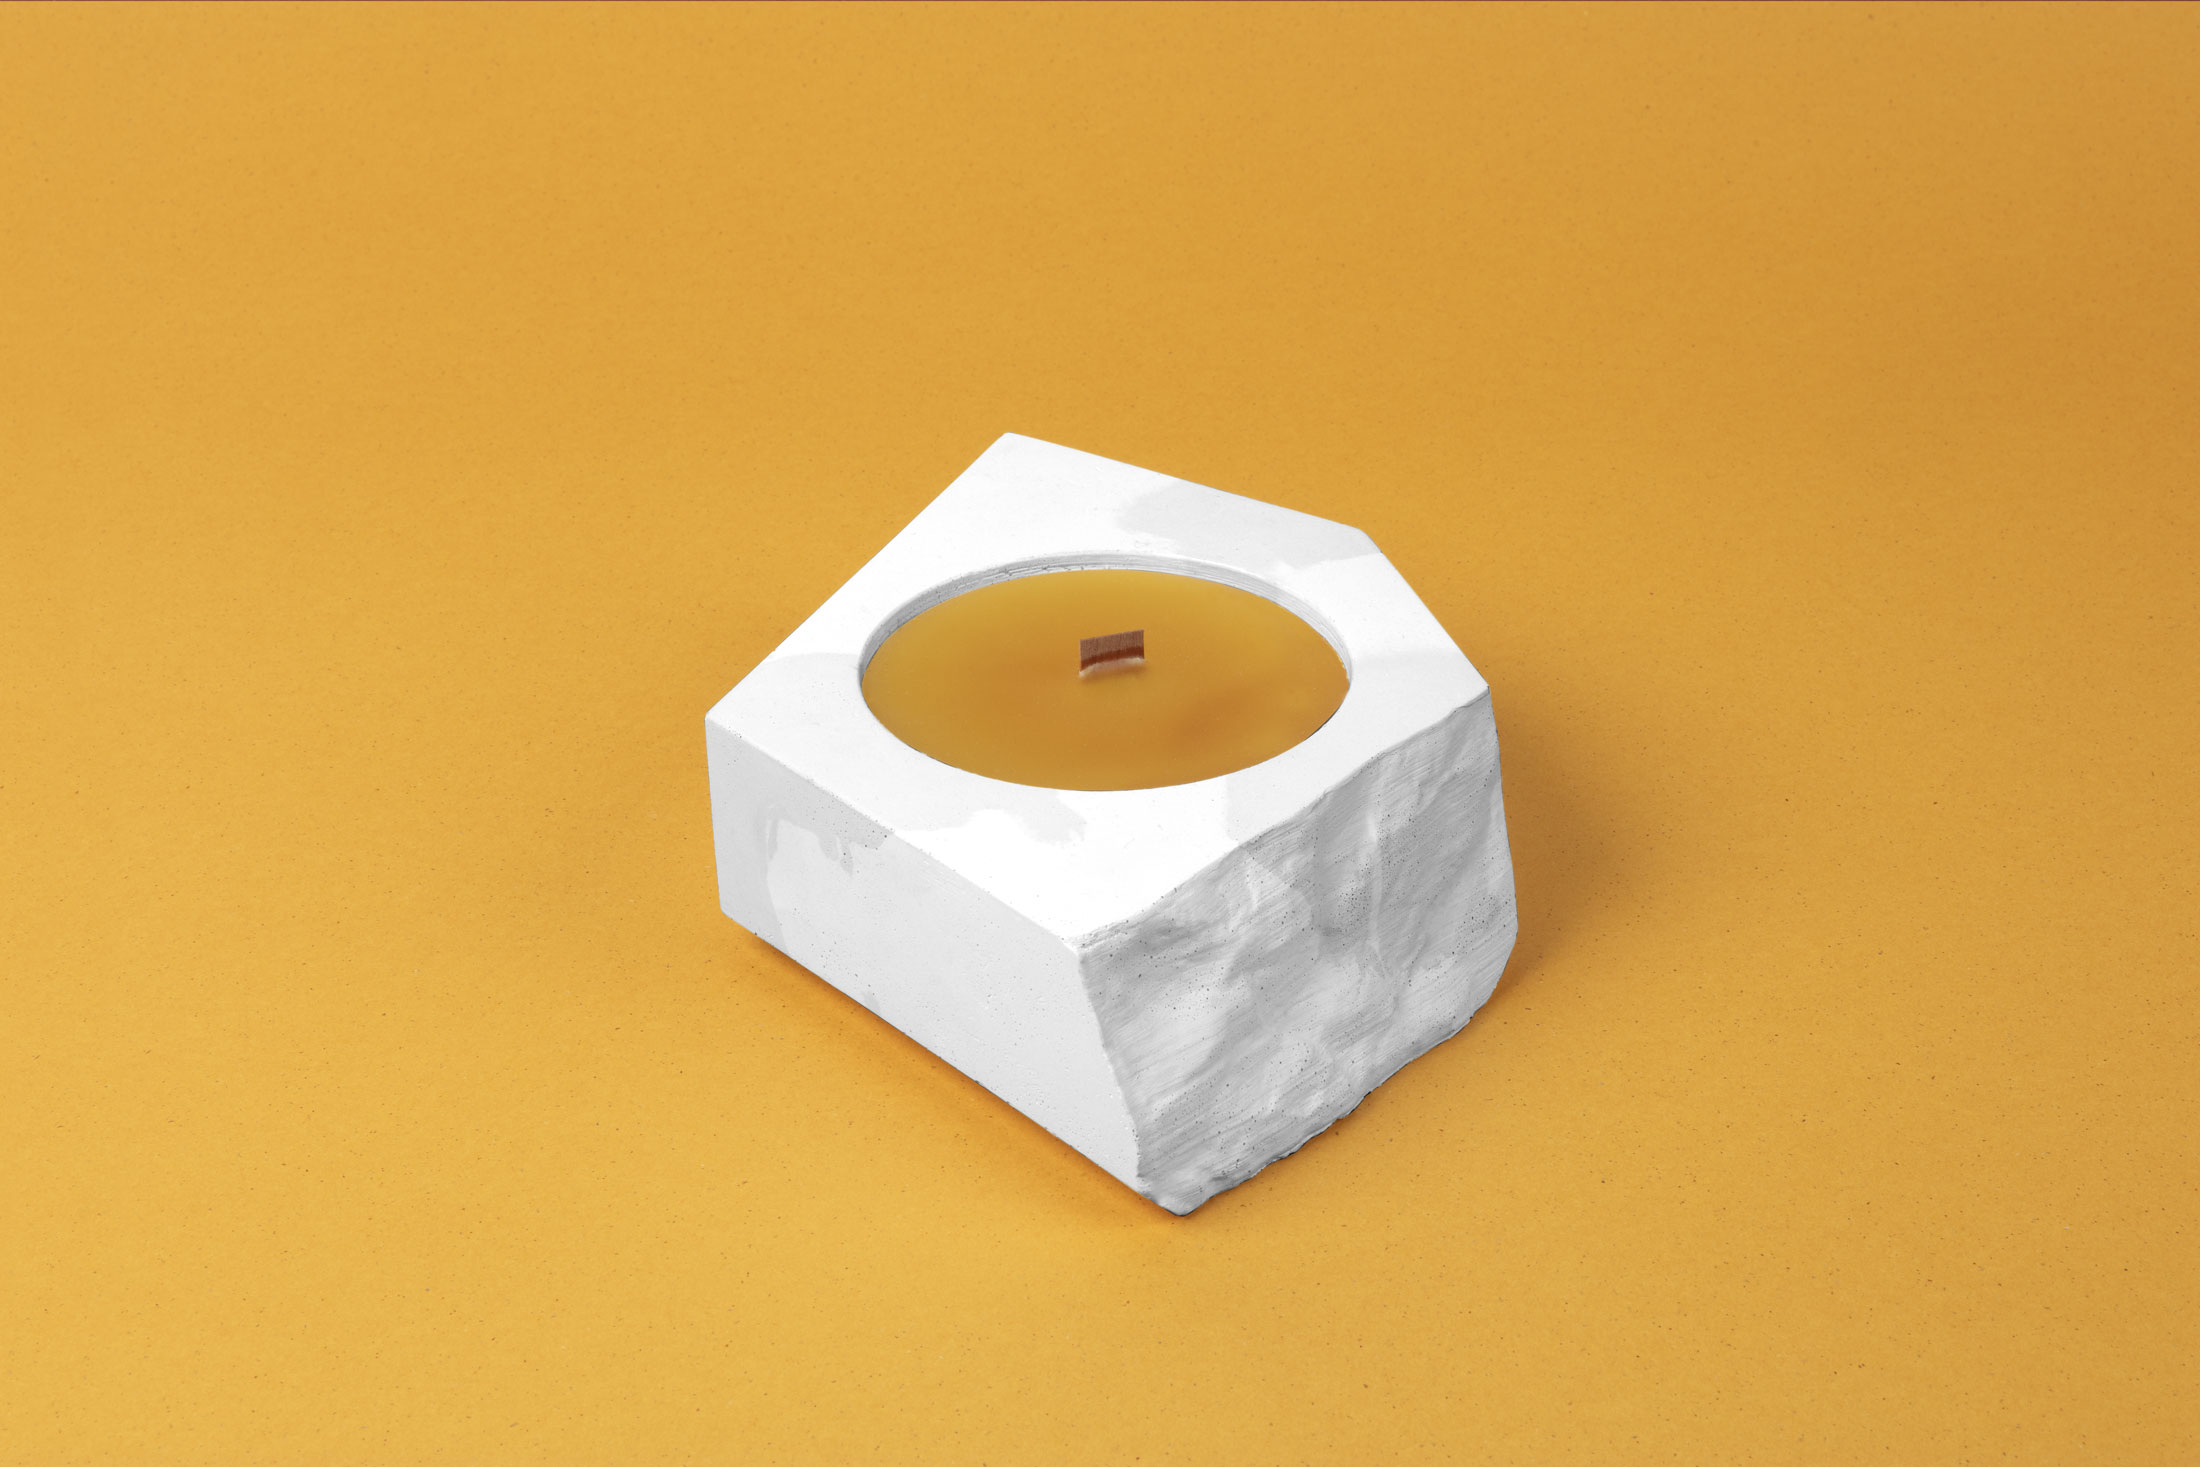 Concrete recycled candle - Noreste Studio